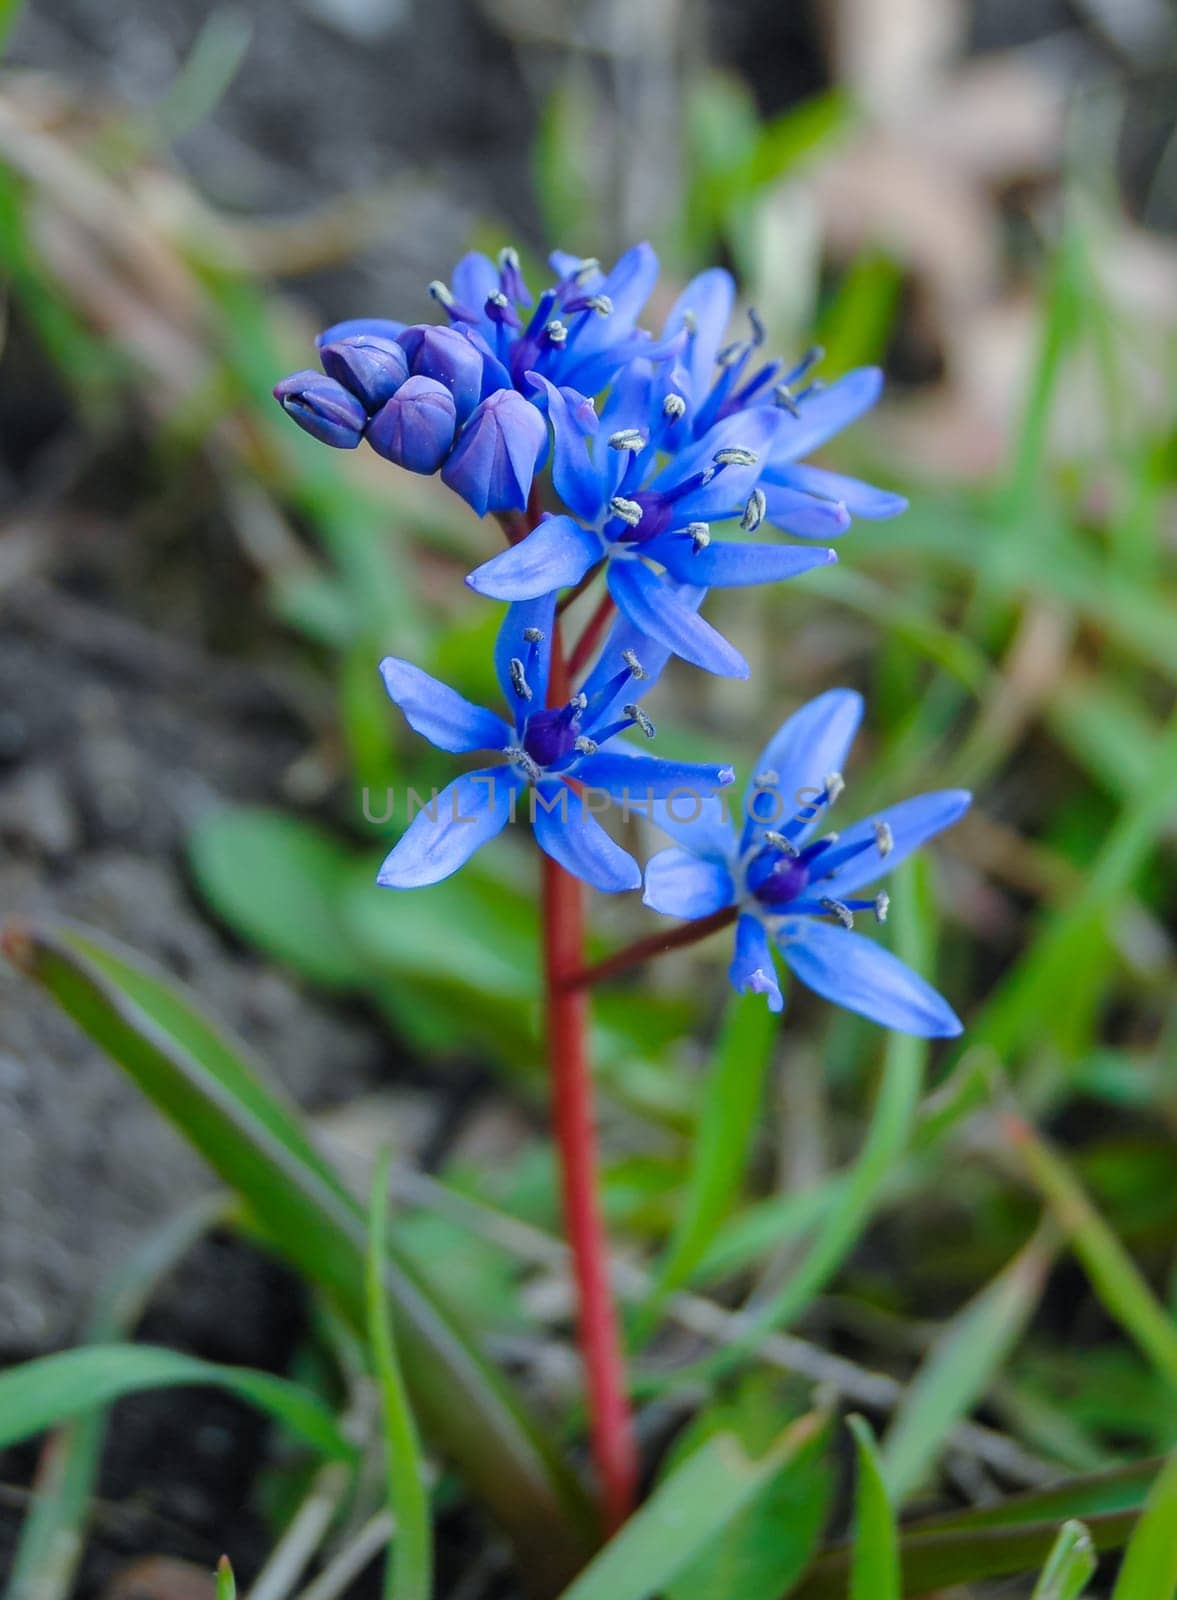 (Scilla bifolia), forest plant blooming in early spring with blue flowers